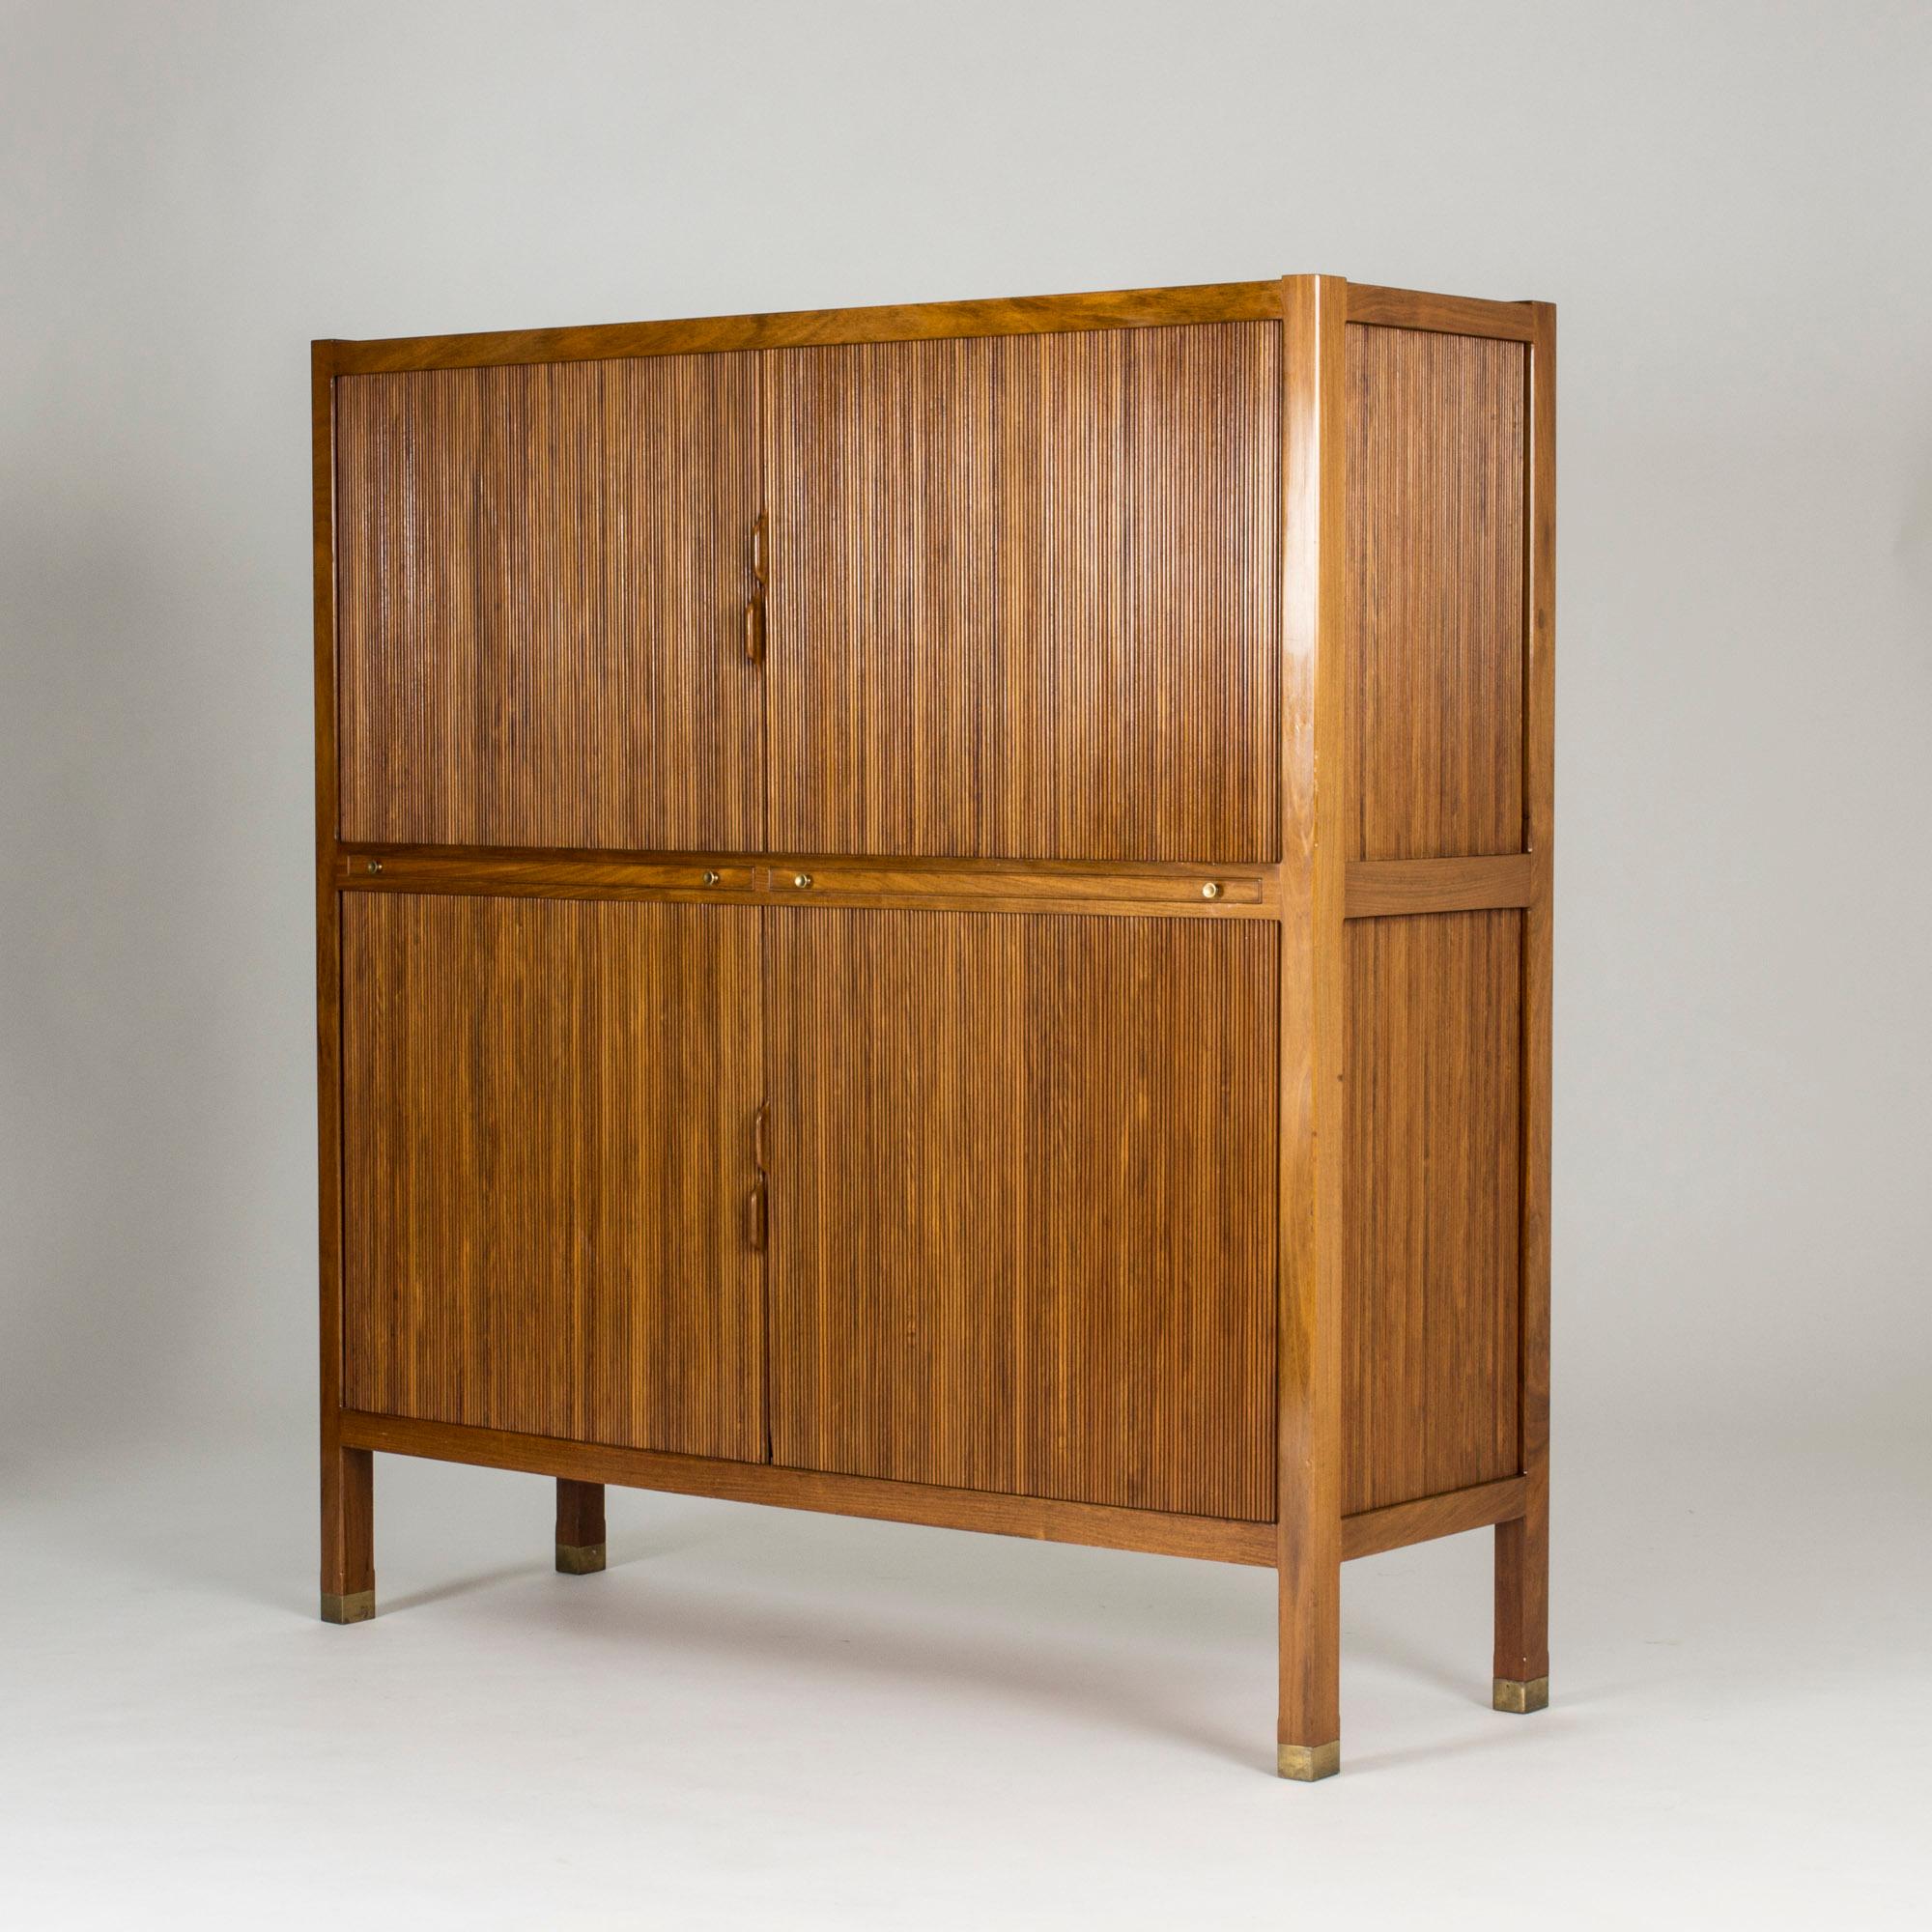 Stunning walnut cabinet by Carl-Axel Acking, masterfully produced by NK. Jalousie doors and beautifully crafted handles. The shelves that can be drawn out have brass strip inlays around the edges. Brass feet.

When Nordiska Kompaniet started to